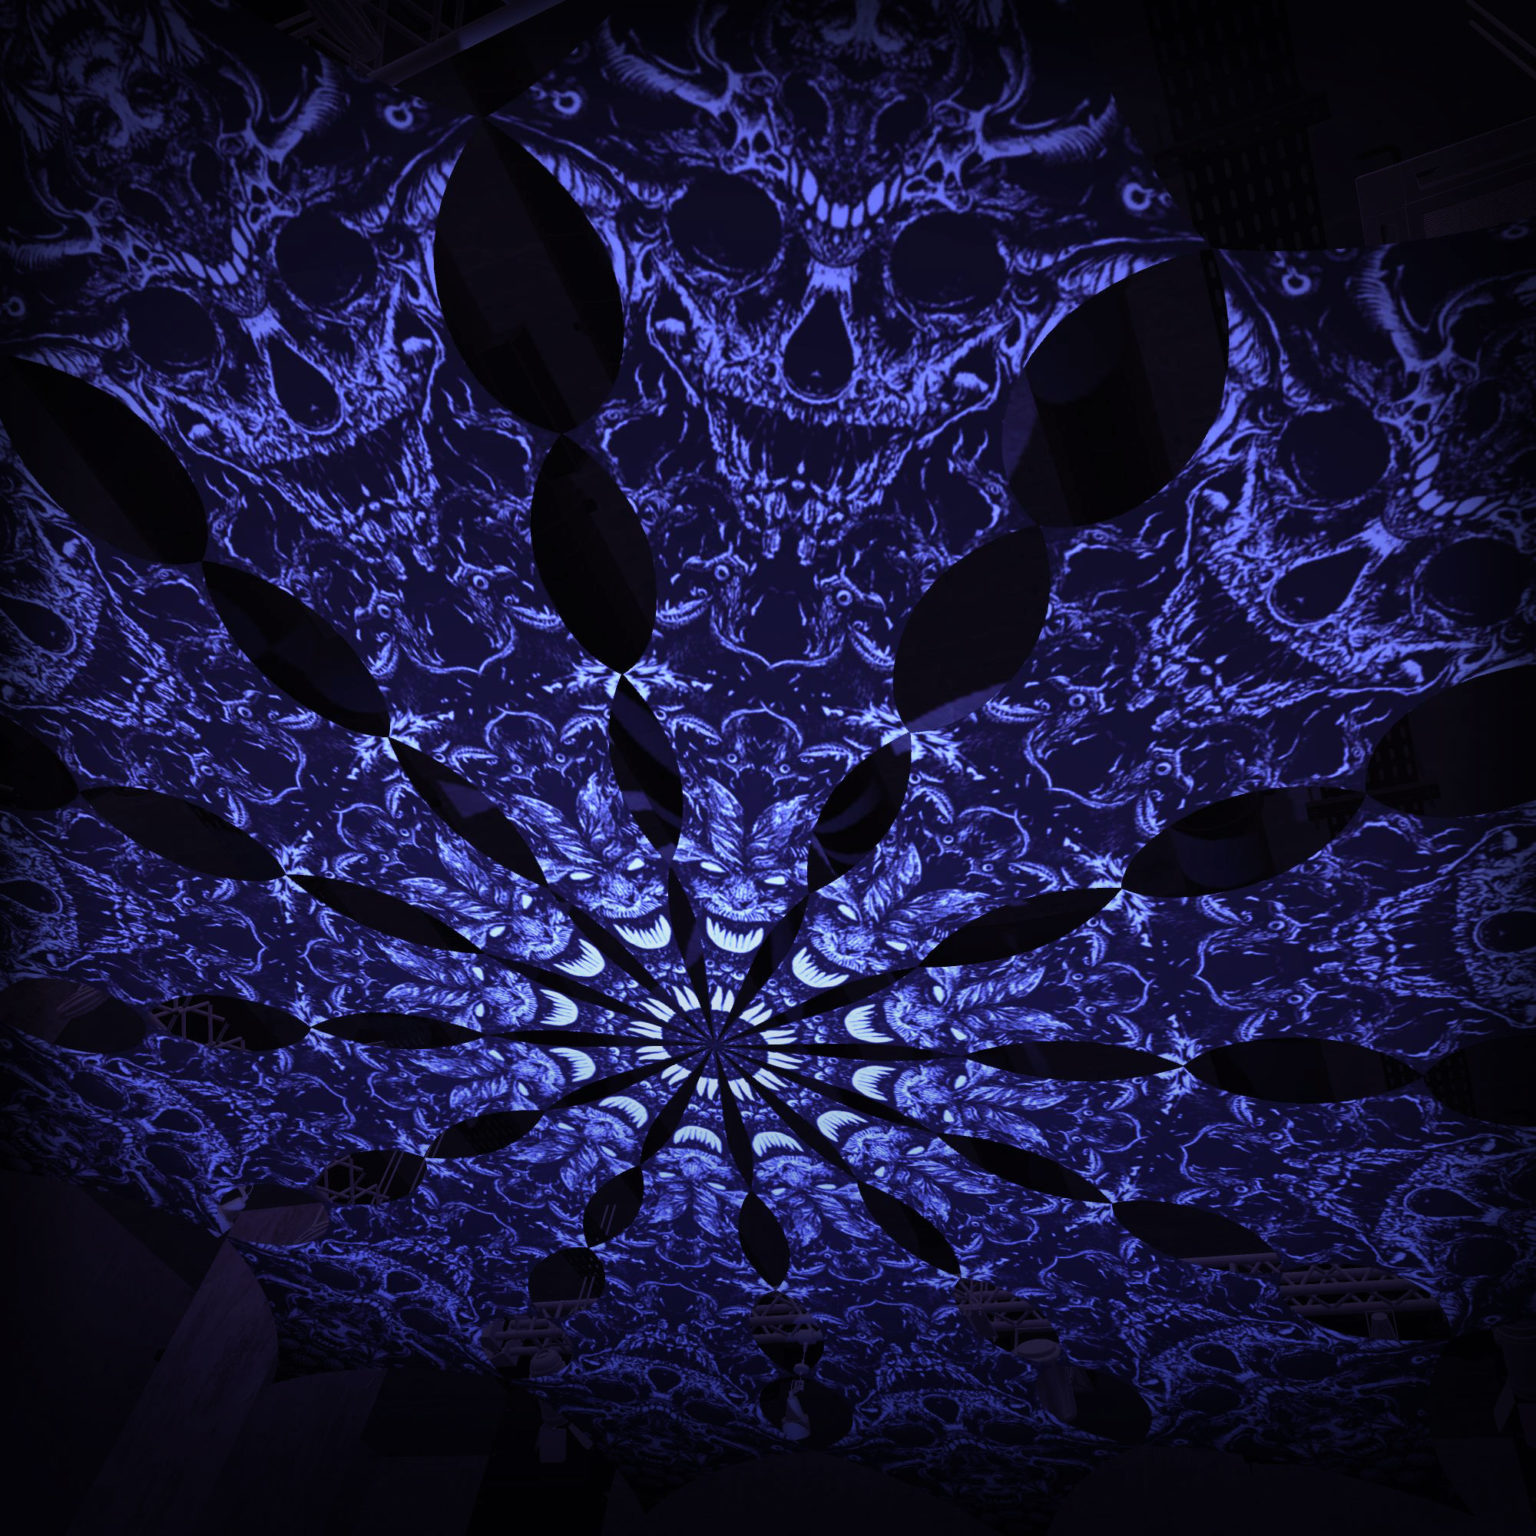 Helloween - Urzonuth -Psychedelic Black&White Canopy - 12 petals set - Large Size 11m diameter -3D-Preview in a club